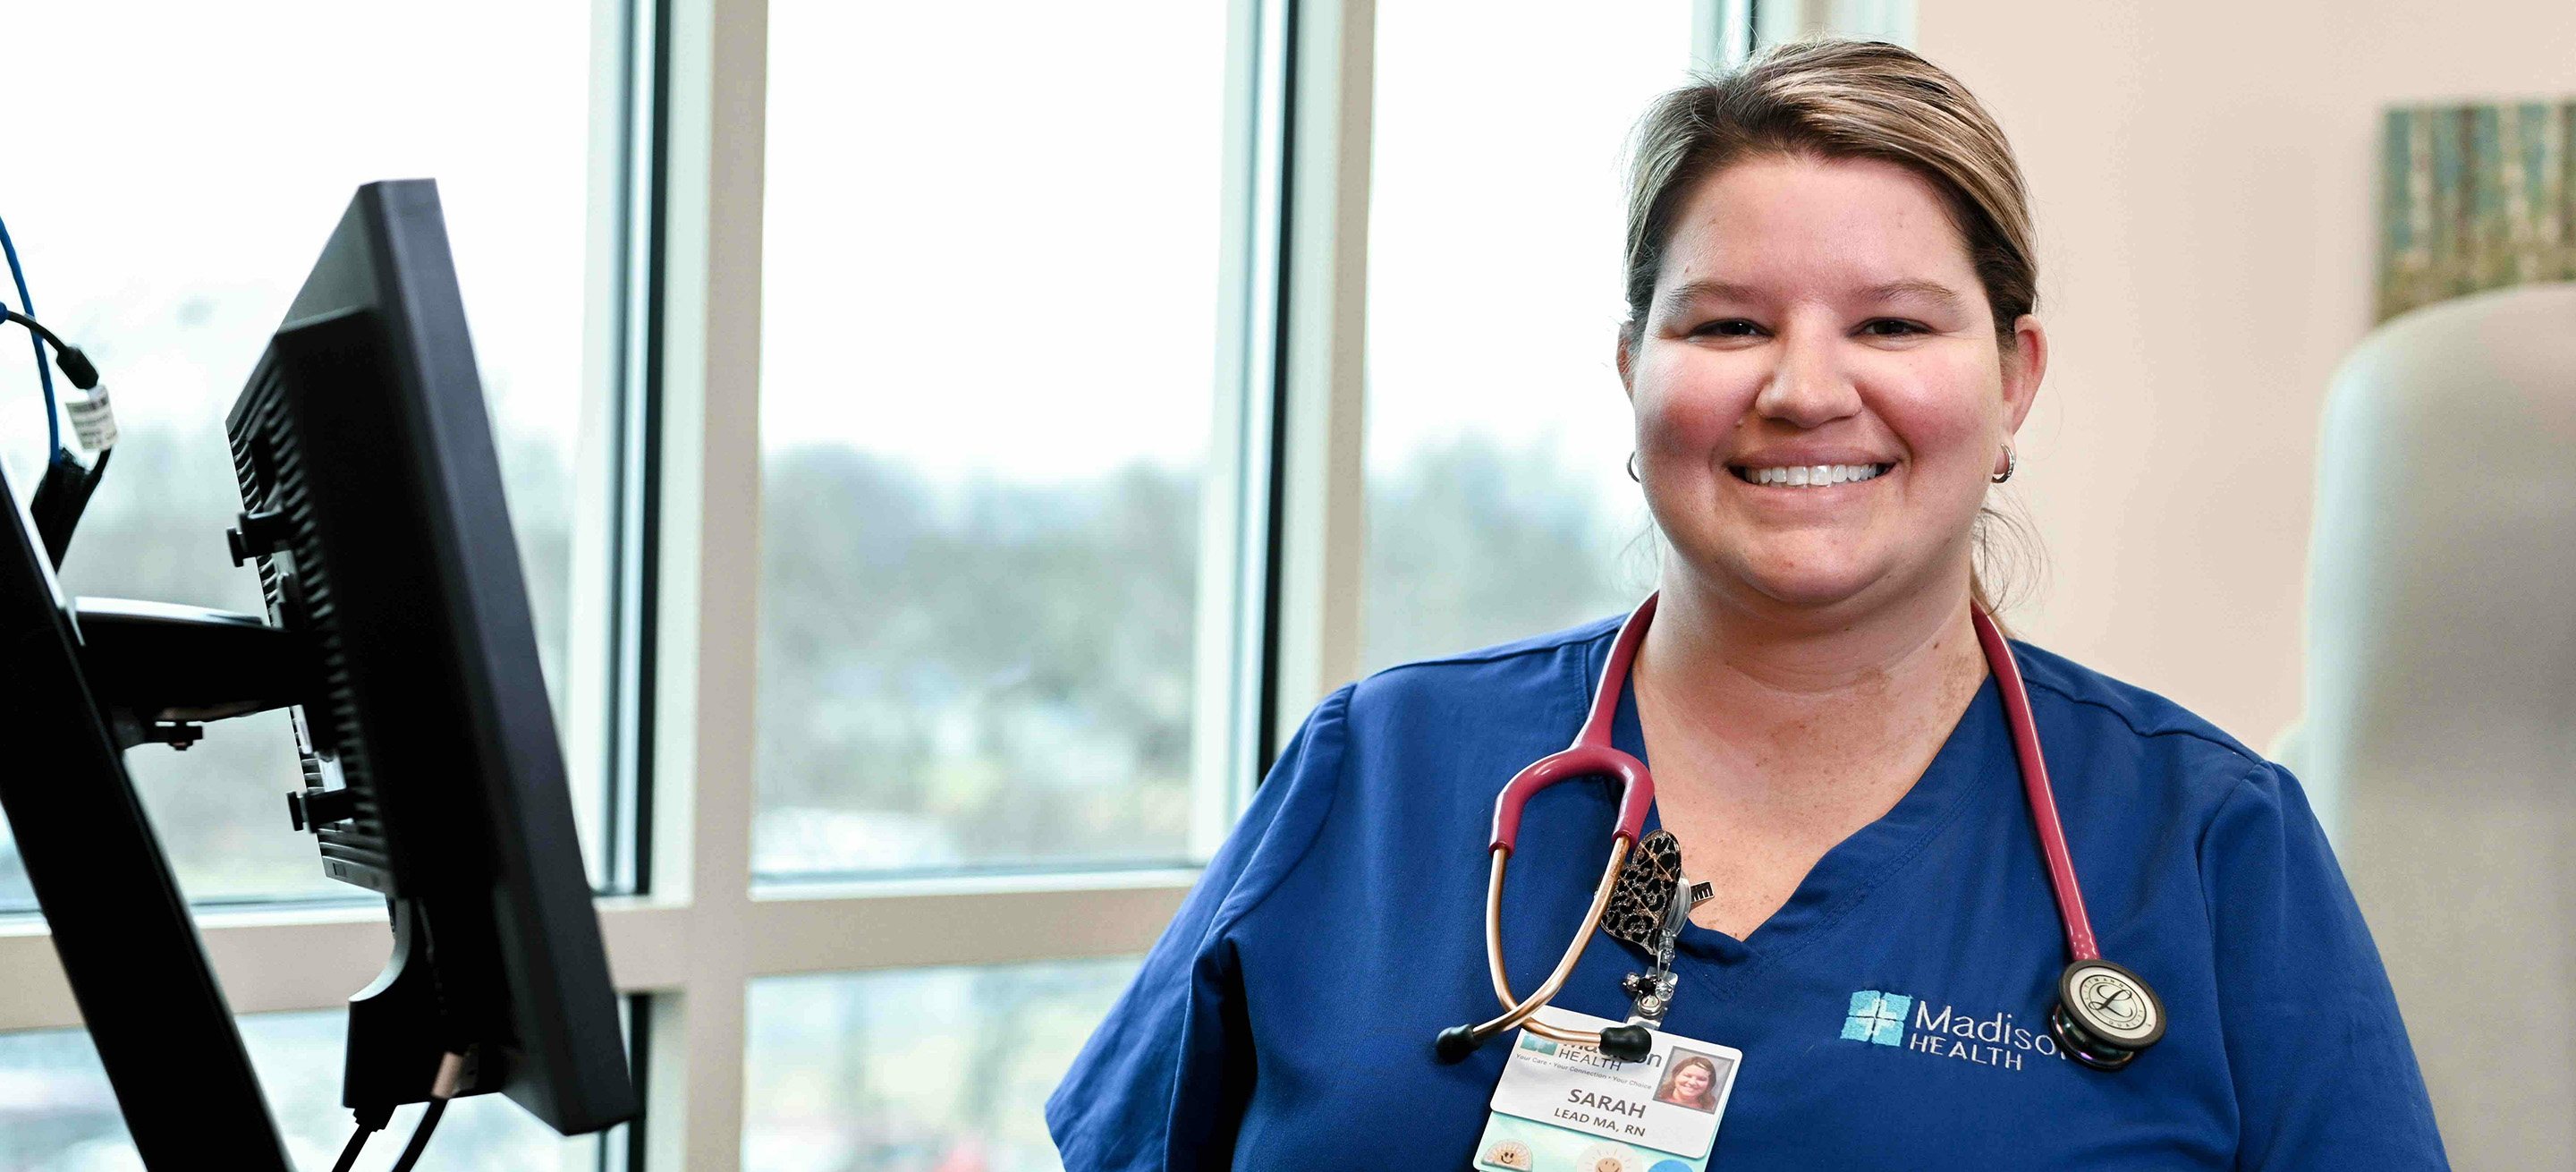 Madison Health Clinician smiling